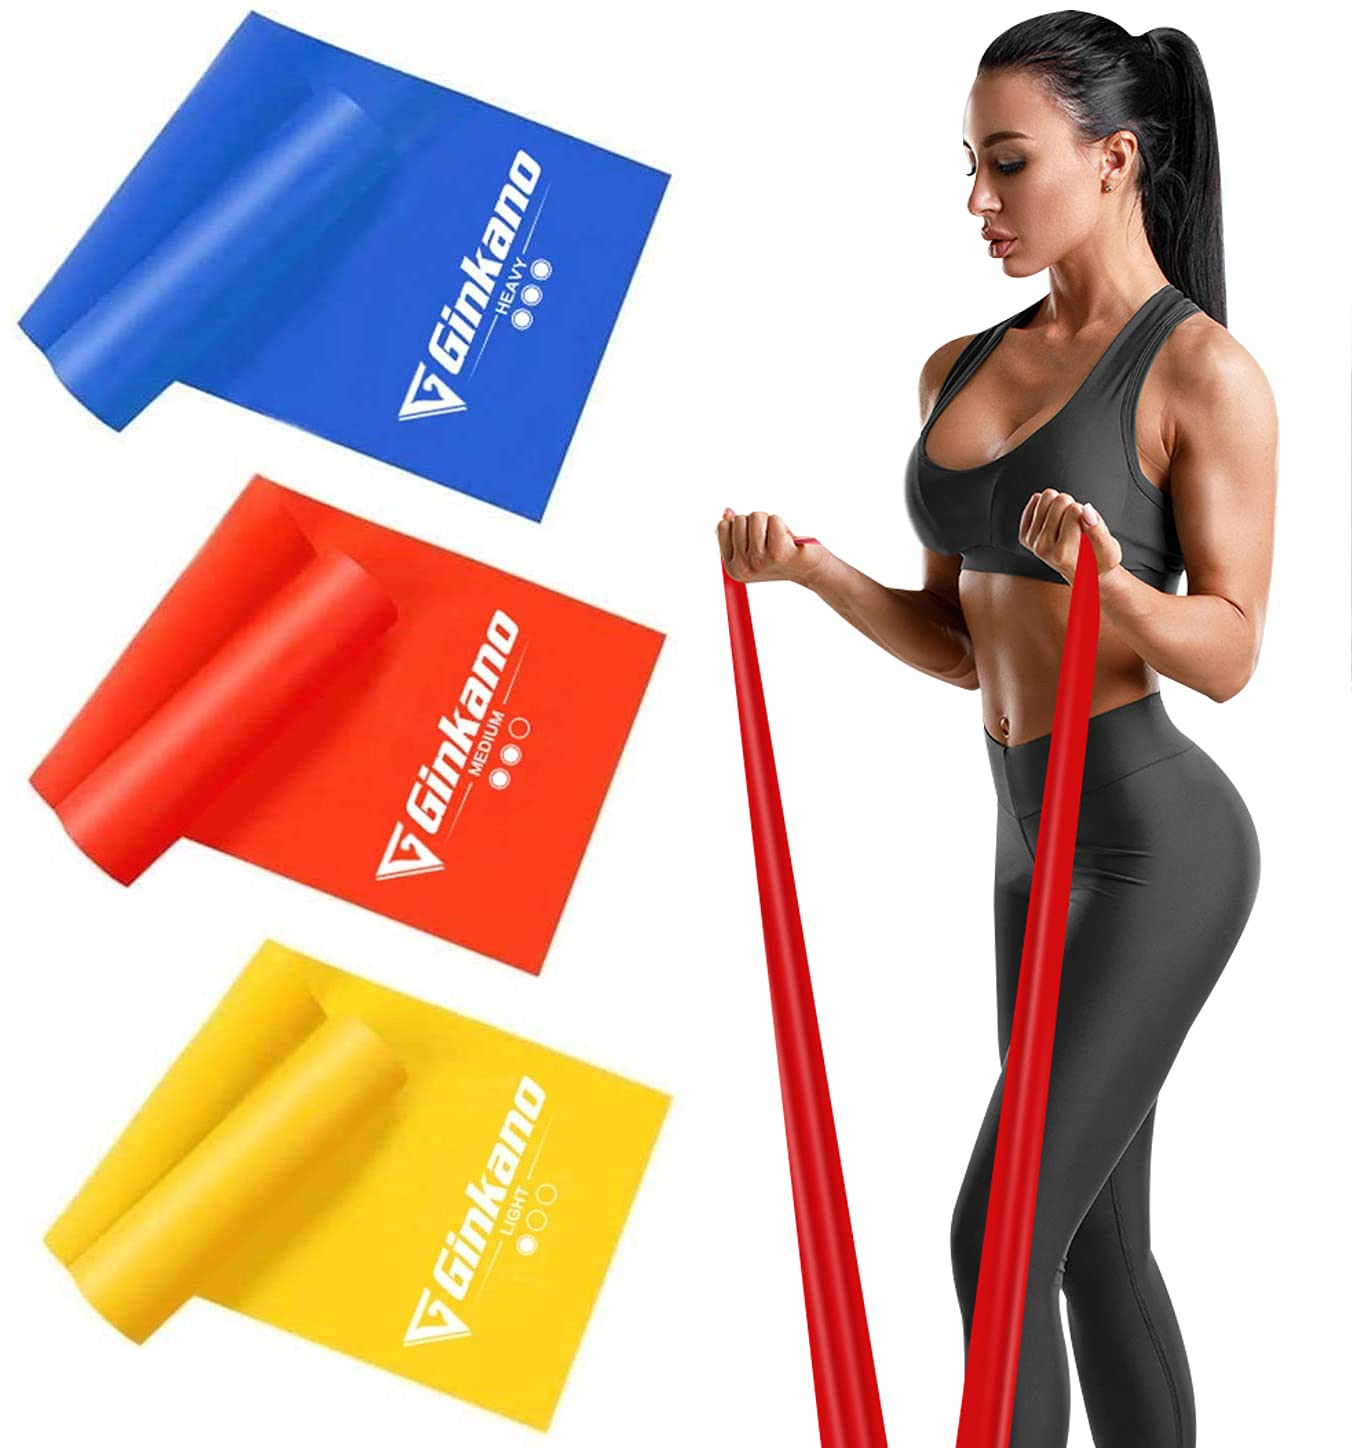 Haquno 3 Pack Exercise Resistance Bands Set with 3 Resistance Levels-2M Exercise Bands Resistance for Women and Man,Ideal for Strength Training, Yoga, Pilates